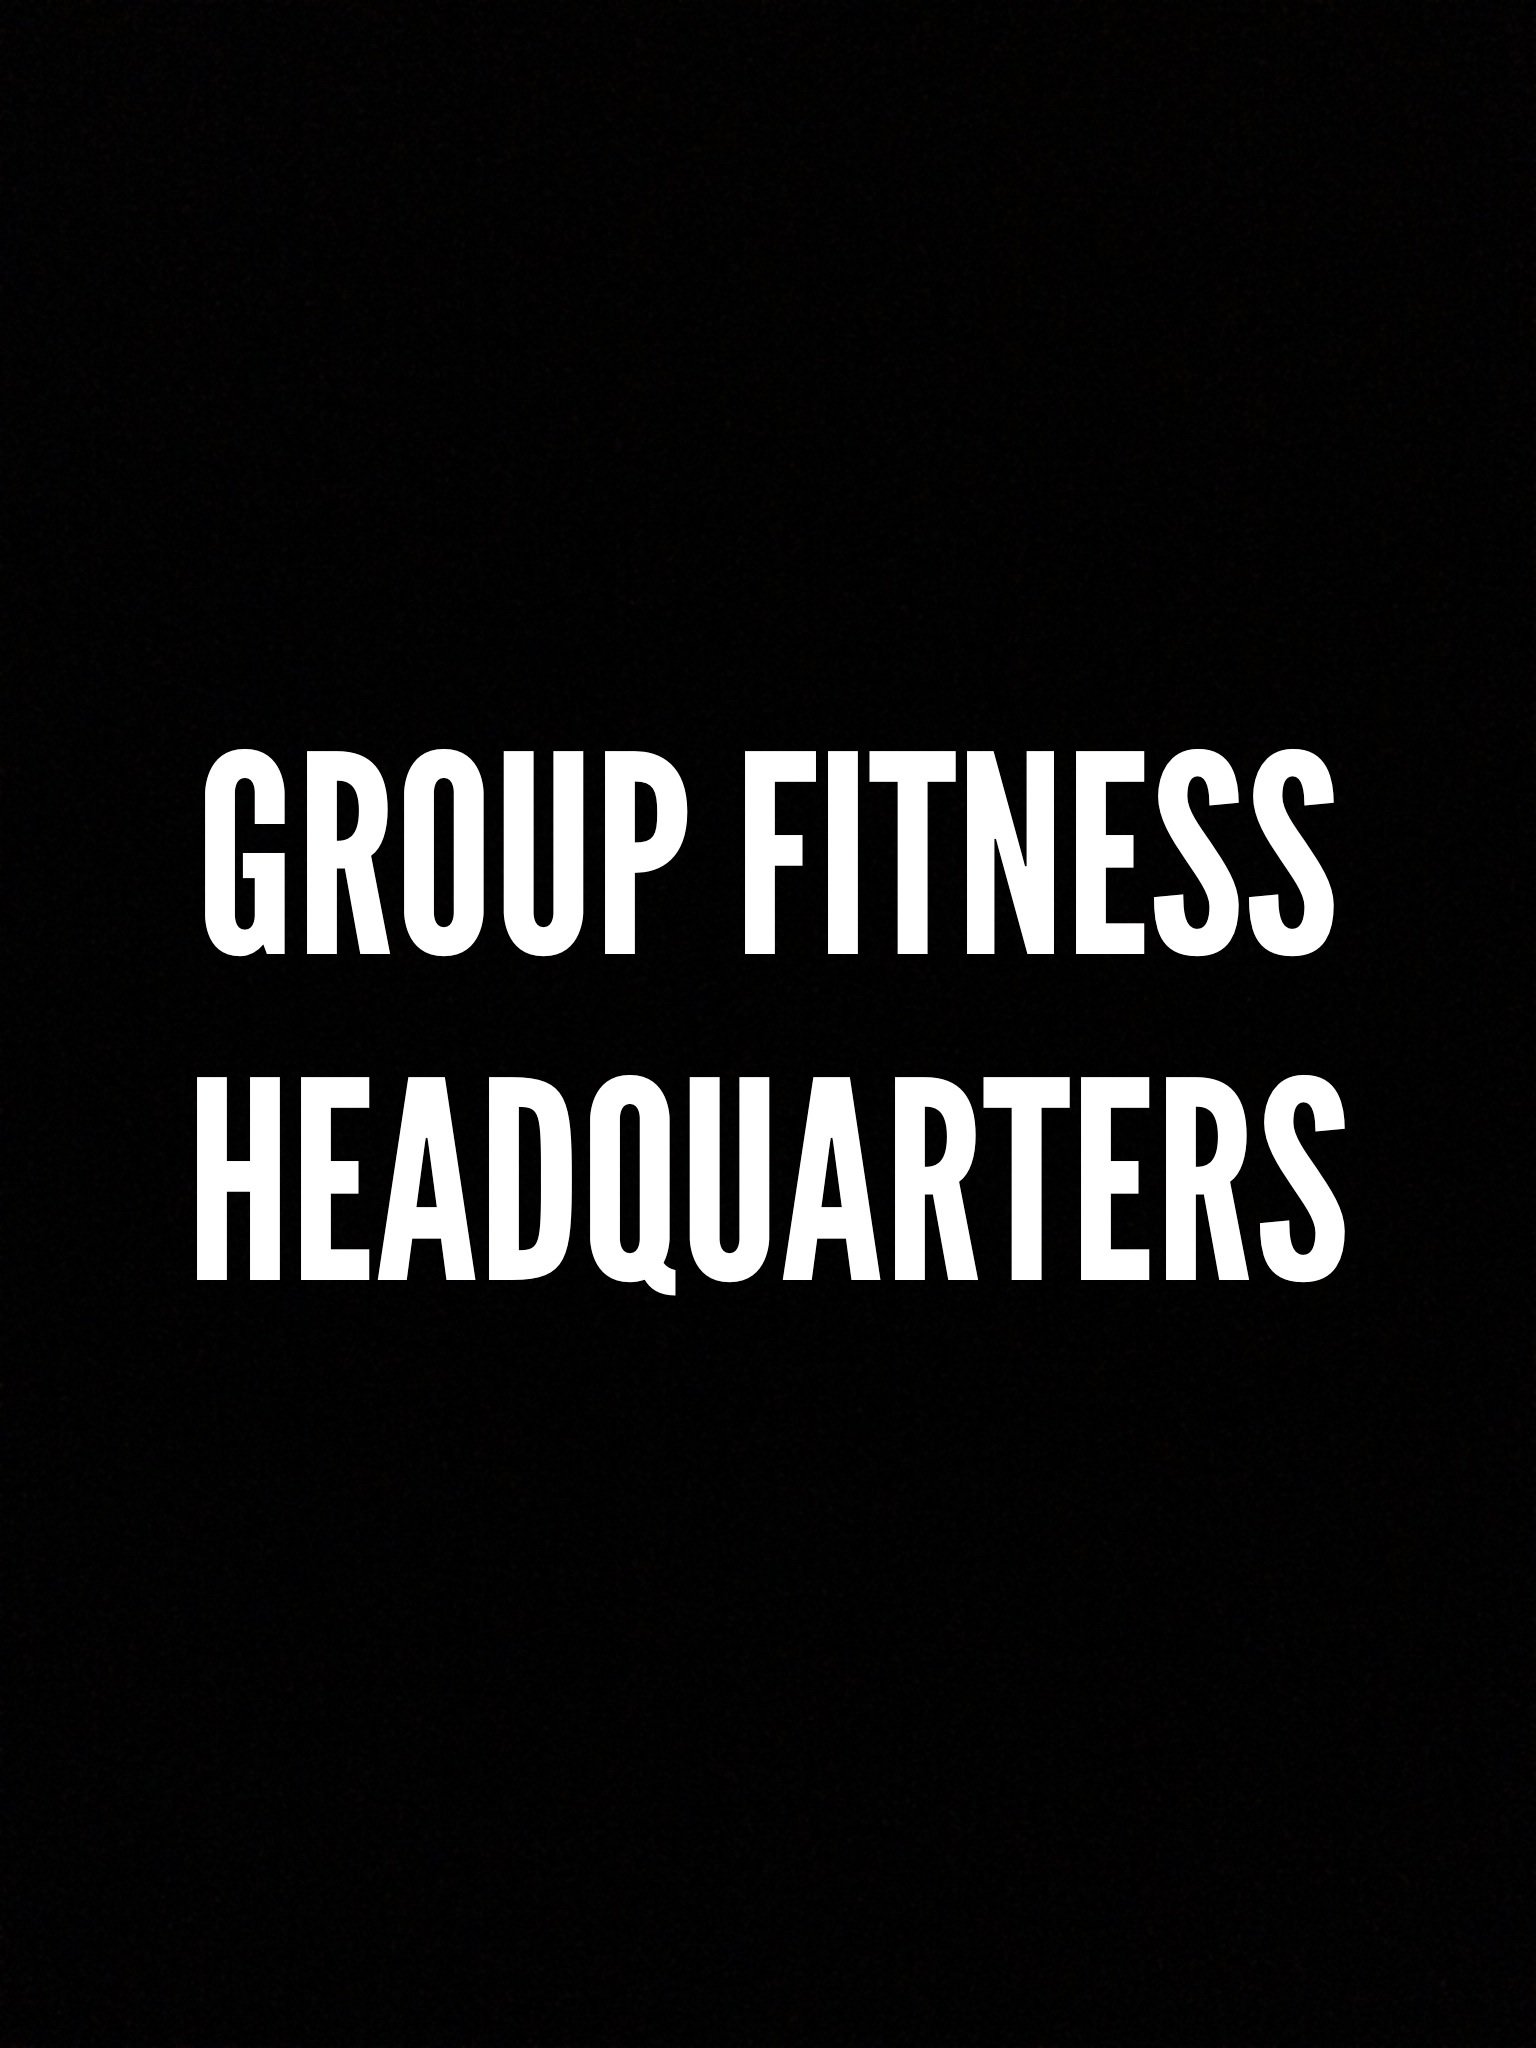 Group Fitness Instructor Resources Galore and the home of OLD SKOOL Dance Cardio.  http://t.co/yzr1isZuHB